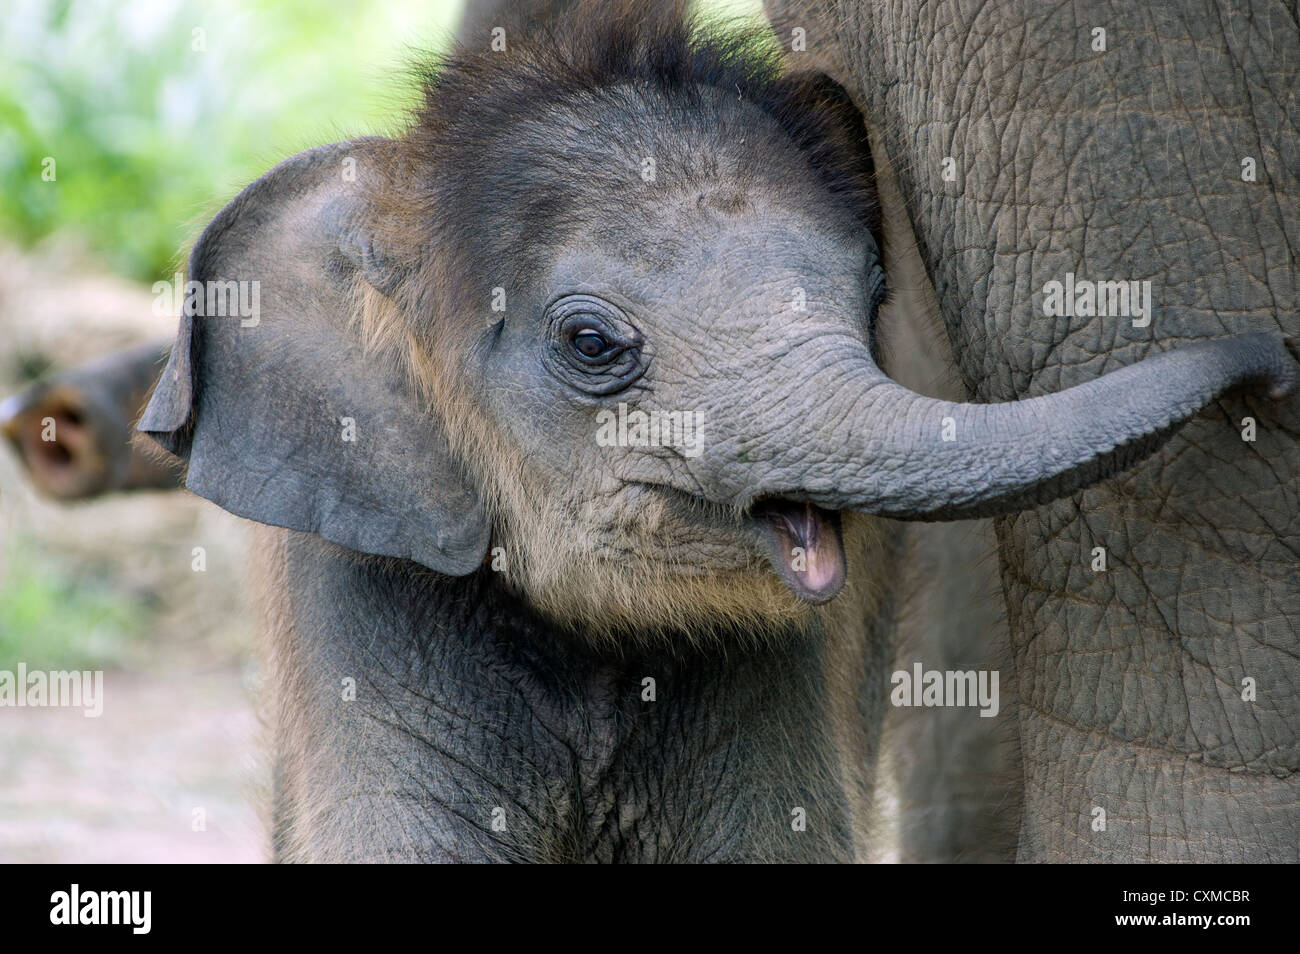 Baby elephant side by side with its mother Stock Photo